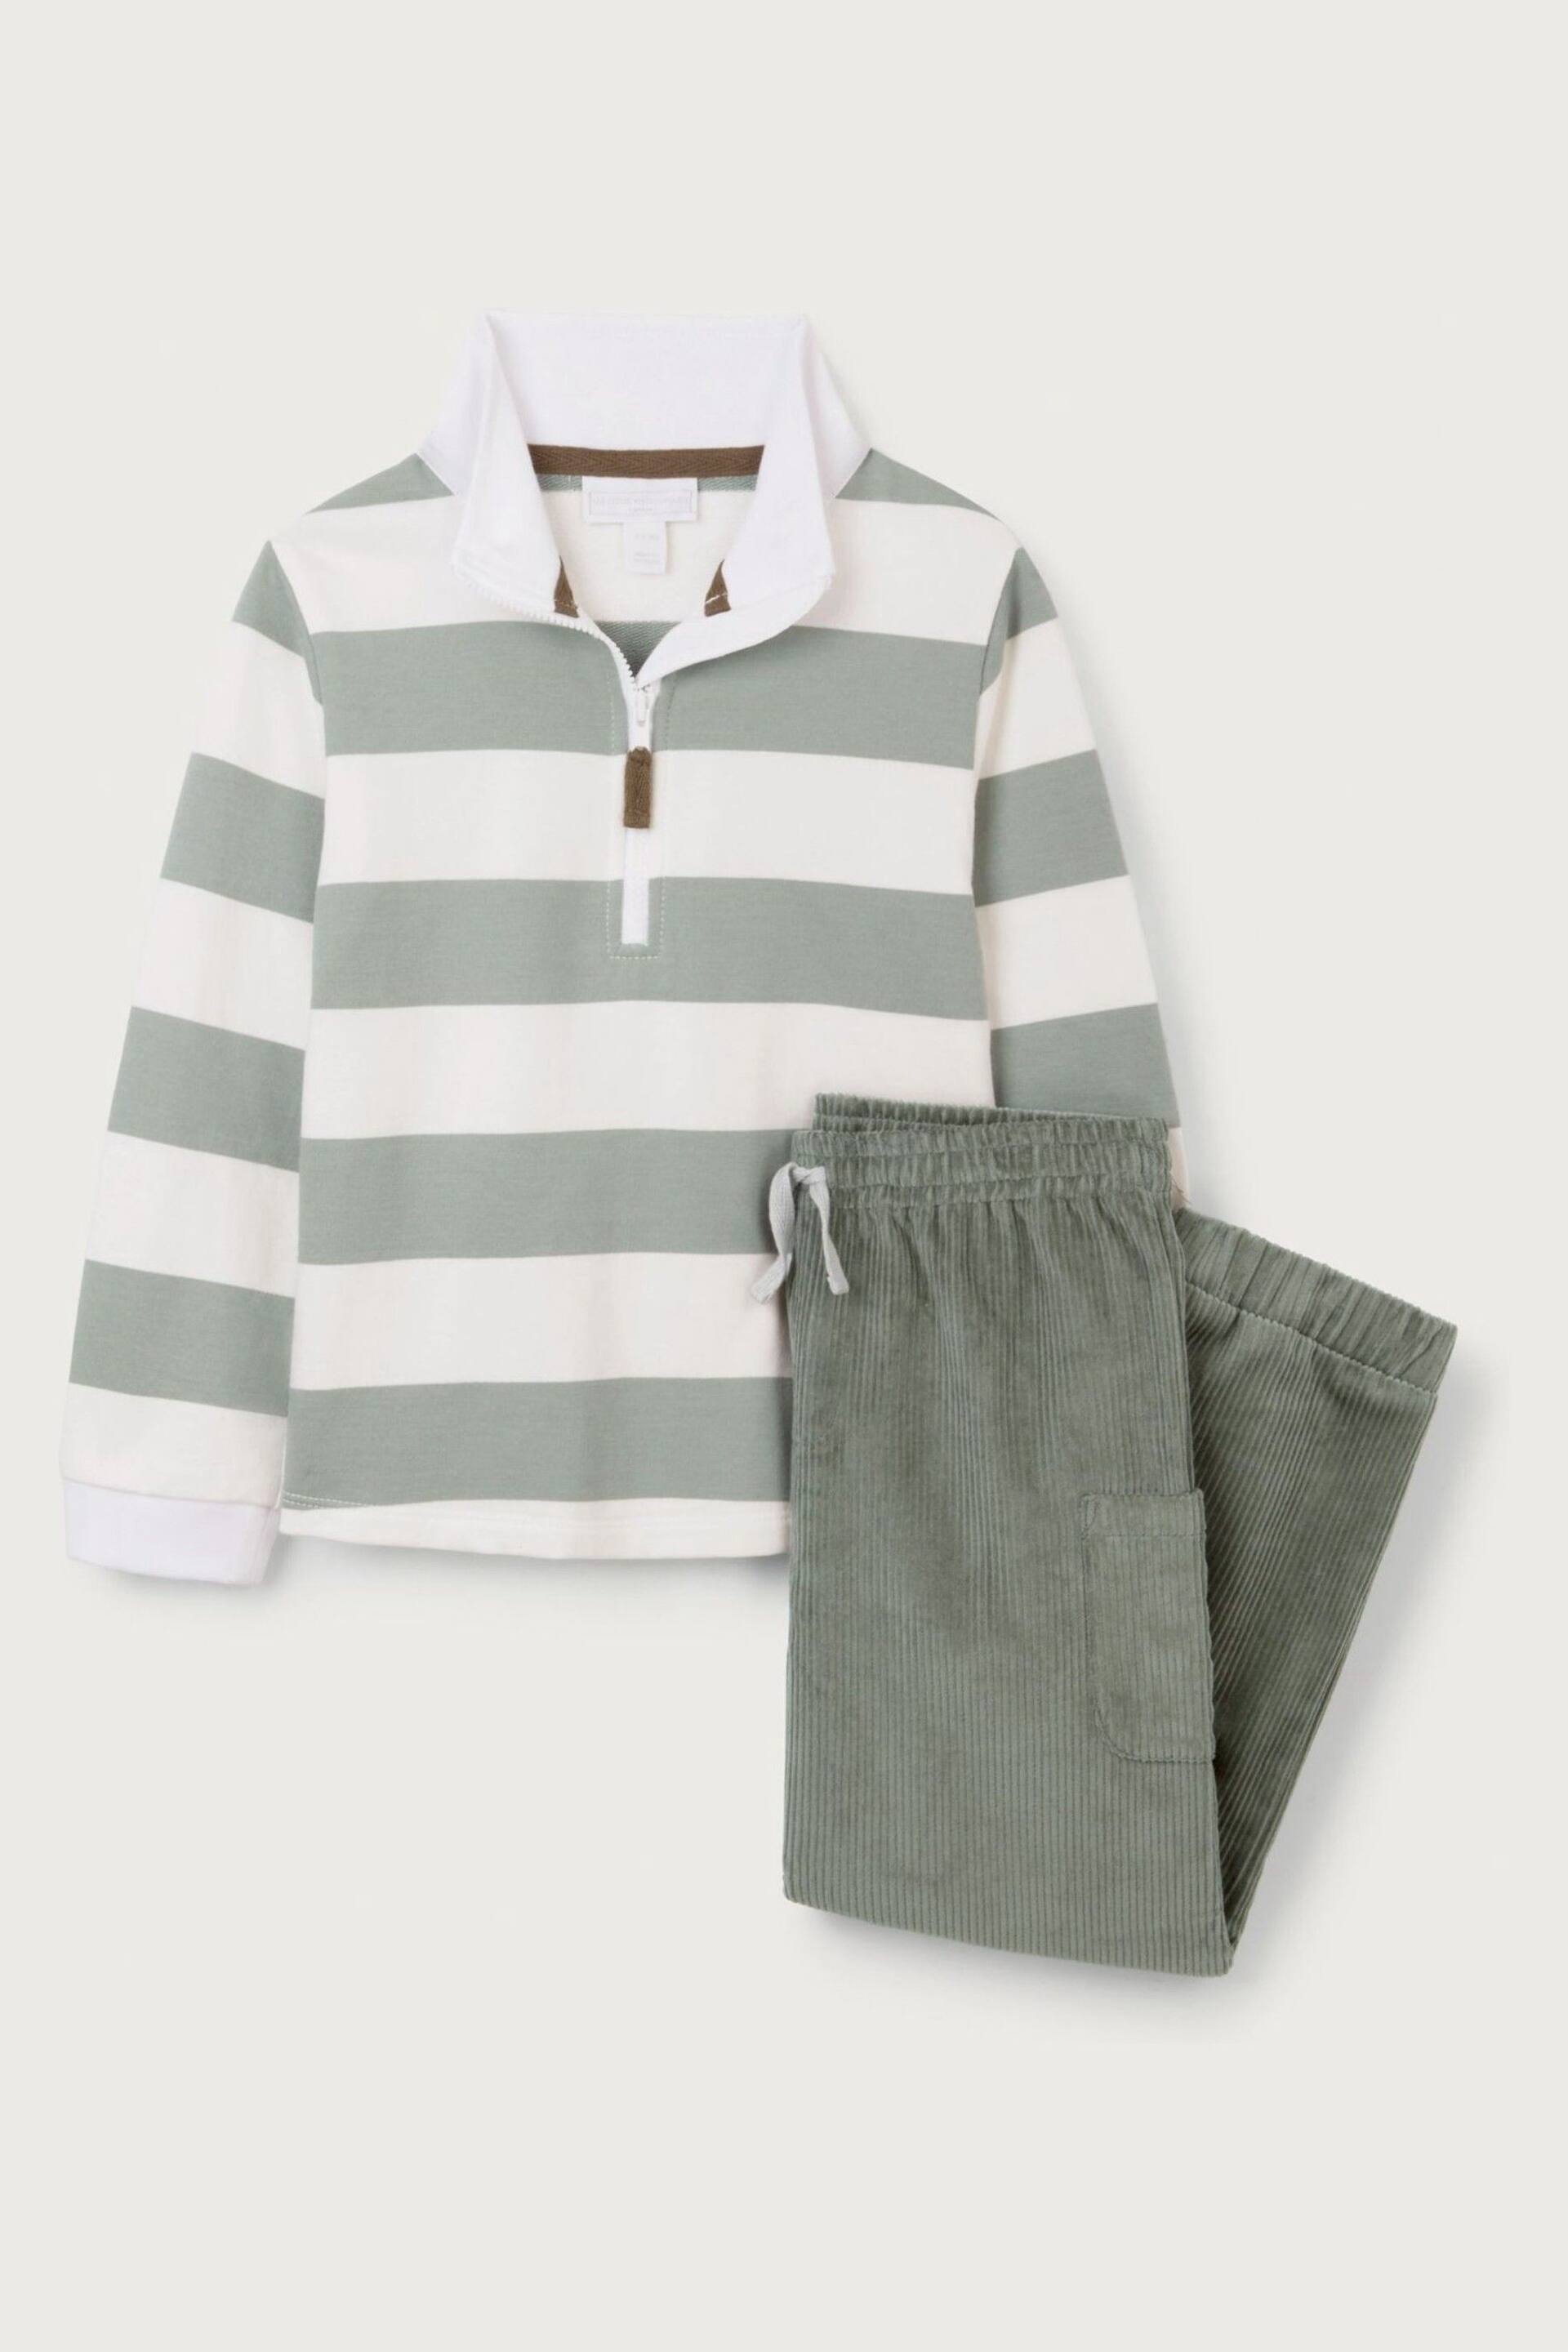 The White Company Green Organic Cotton Rugby Shirt & Cord Trouser Set - Image 9 of 10